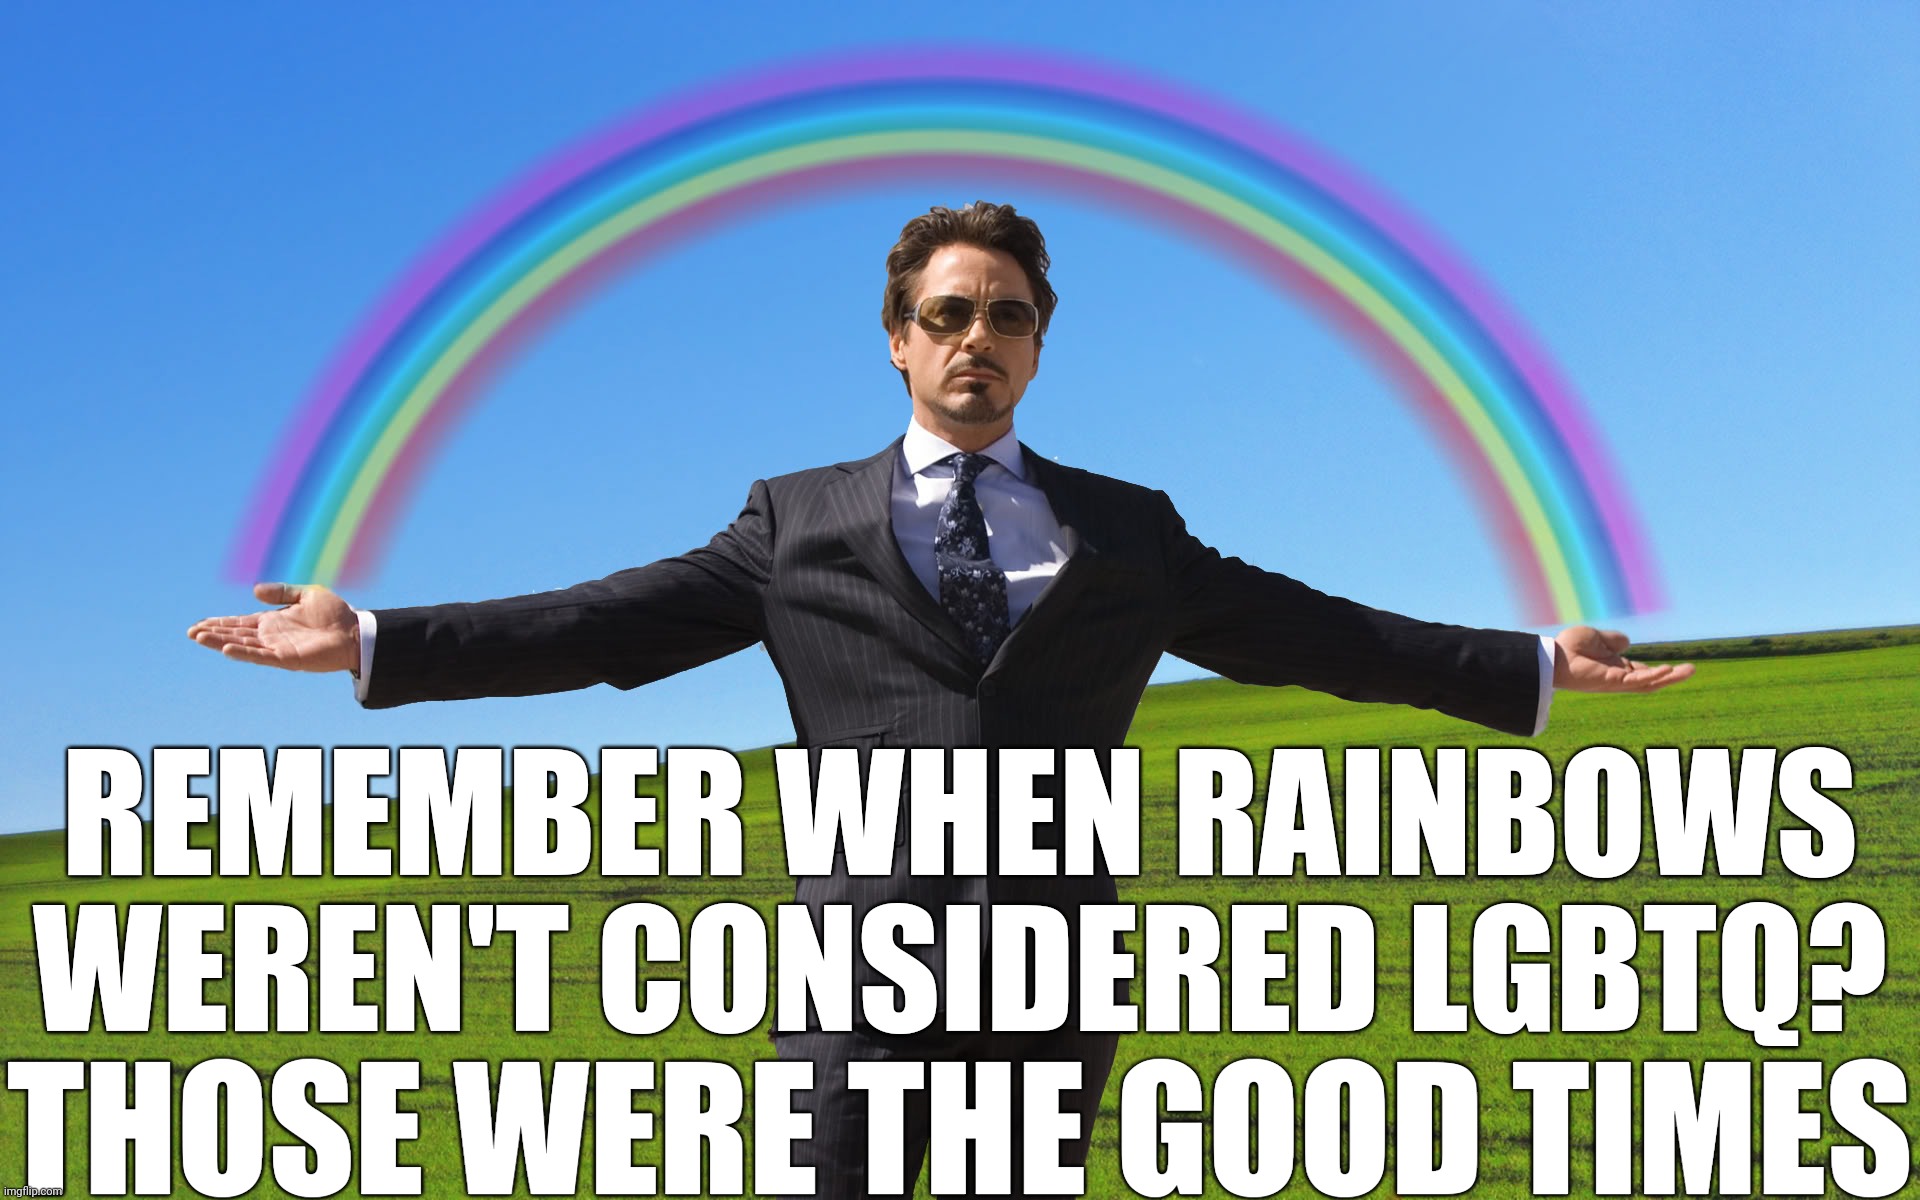 What have we become | REMEMBER WHEN RAINBOWS WEREN'T CONSIDERED LGBTQ? THOSE WERE THE GOOD TIMES | image tagged in tony stark rainbow,memories | made w/ Imgflip meme maker